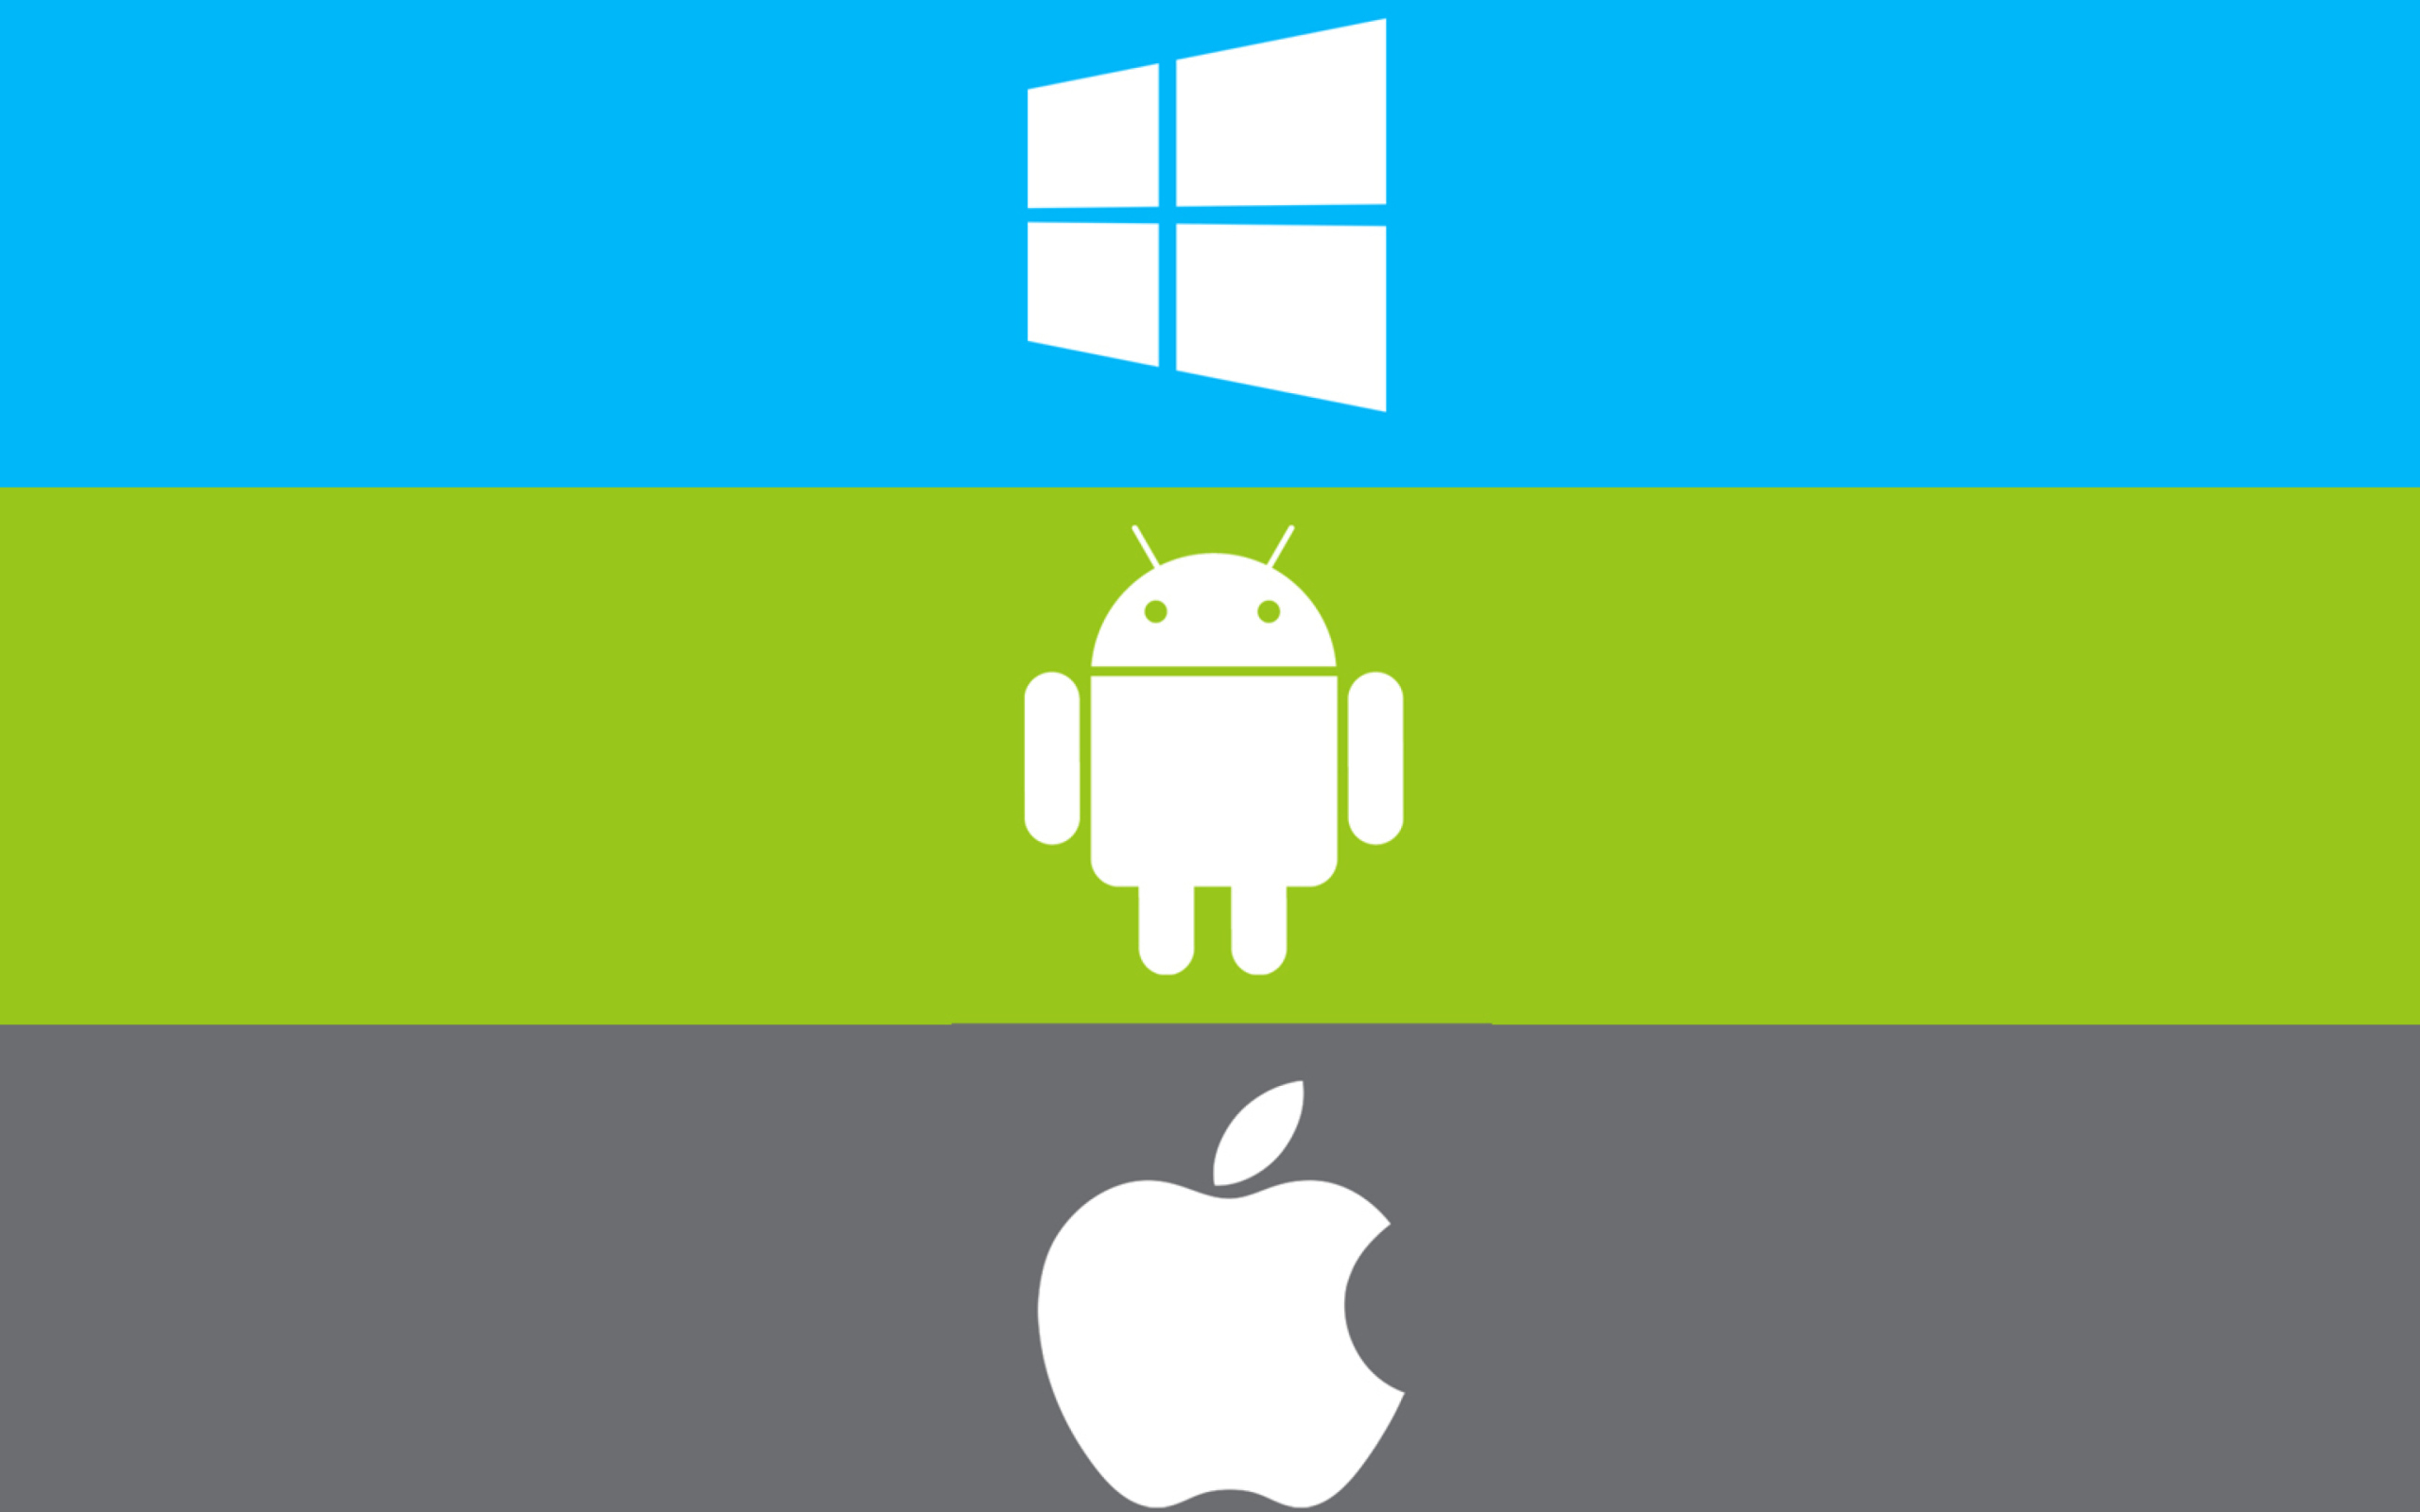 Windows, Apple, Android - What's Your Choice? wallpaper 2560x1600